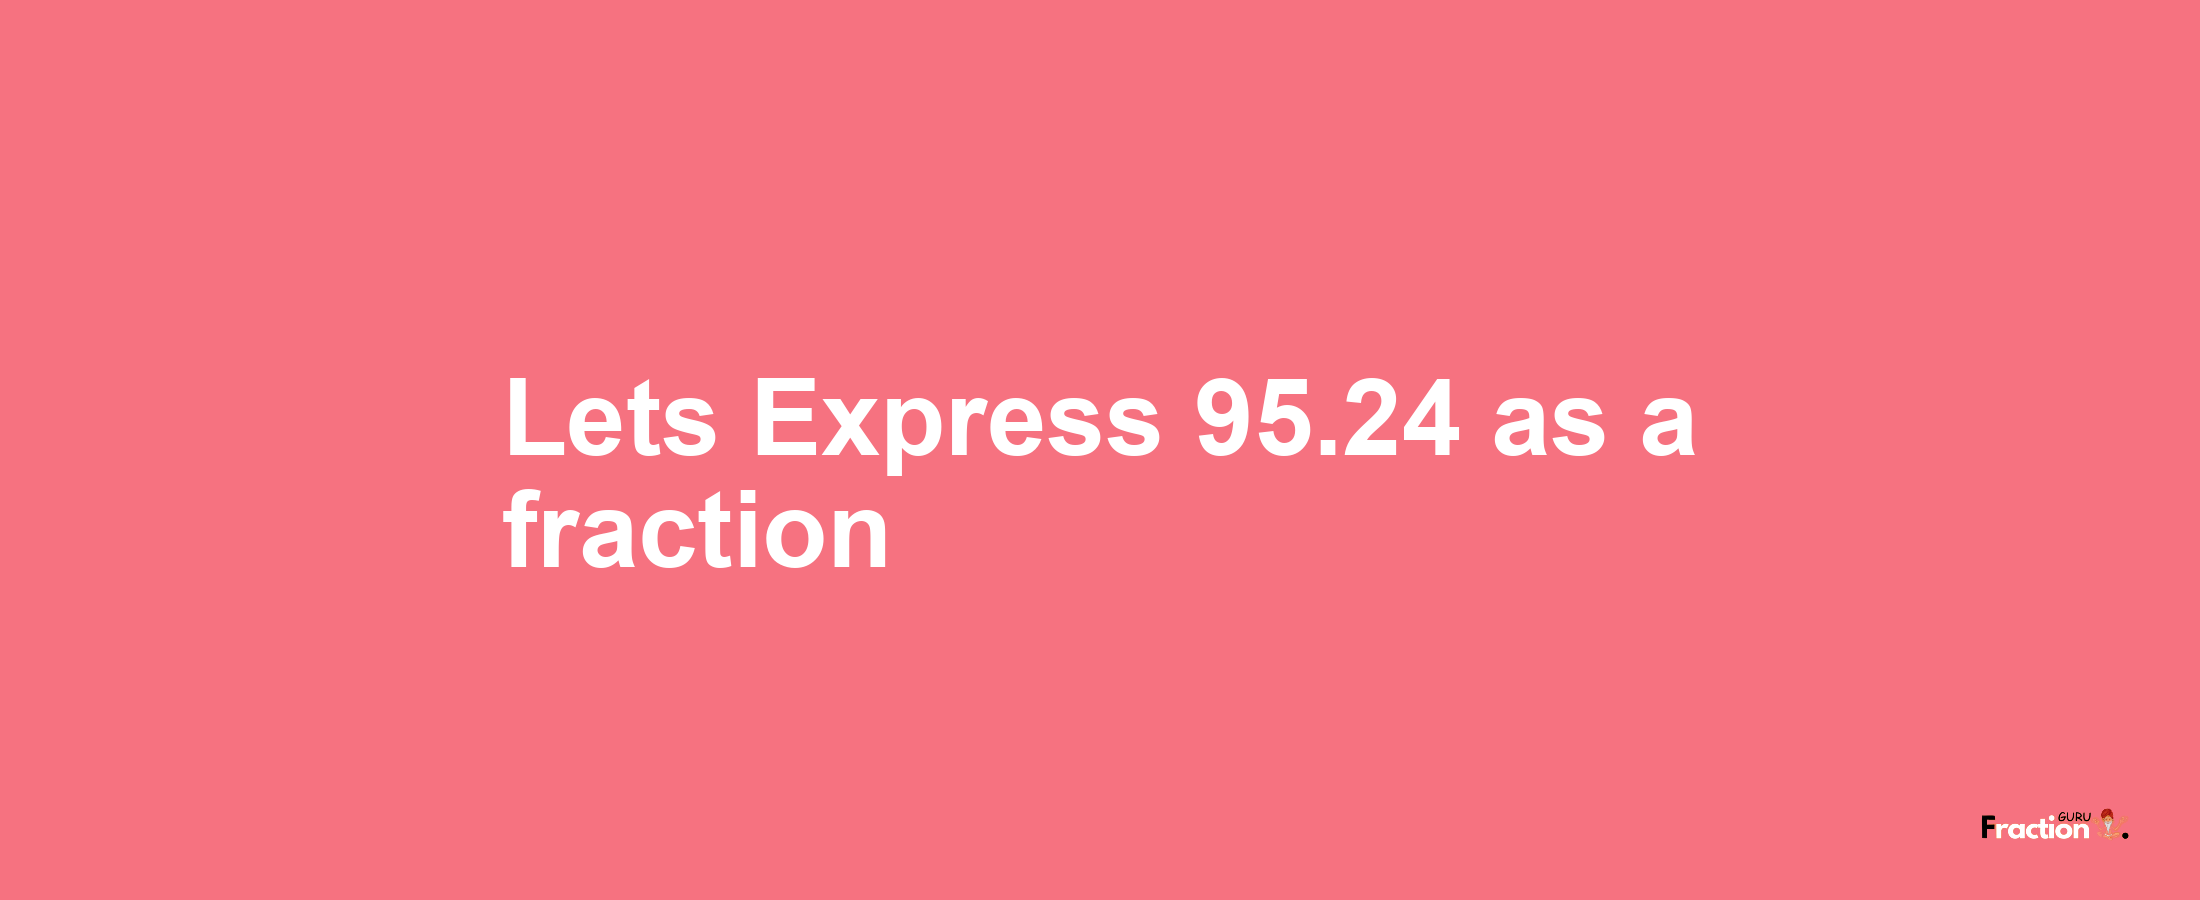 Lets Express 95.24 as afraction